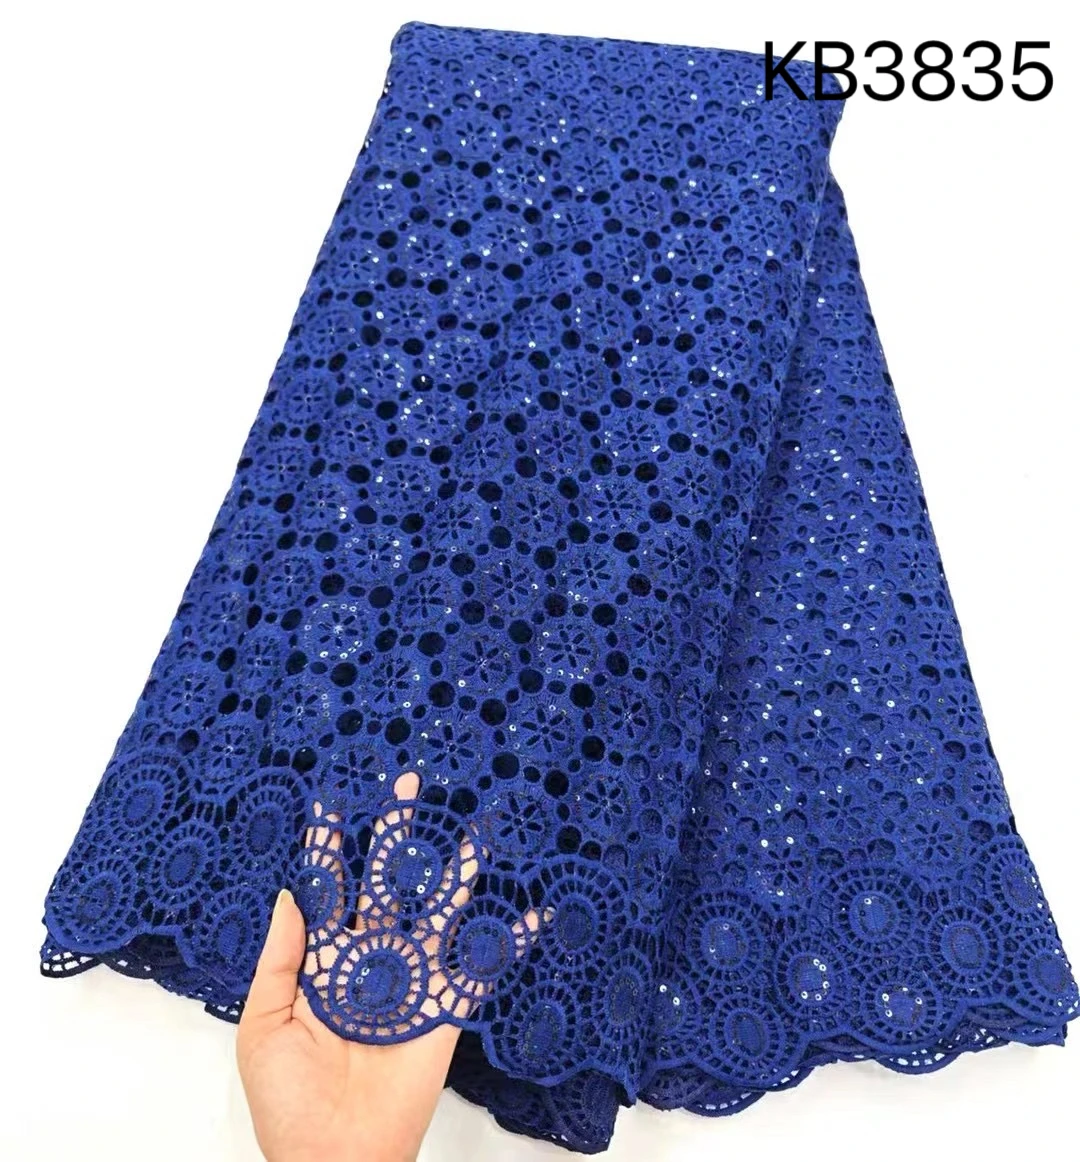 

Royal Blue Water Souble Sequins Lace Nigeria Tulle Lace Fabric with Sequence Guipure Lace Fabric French Mesh for Sewing KB3835